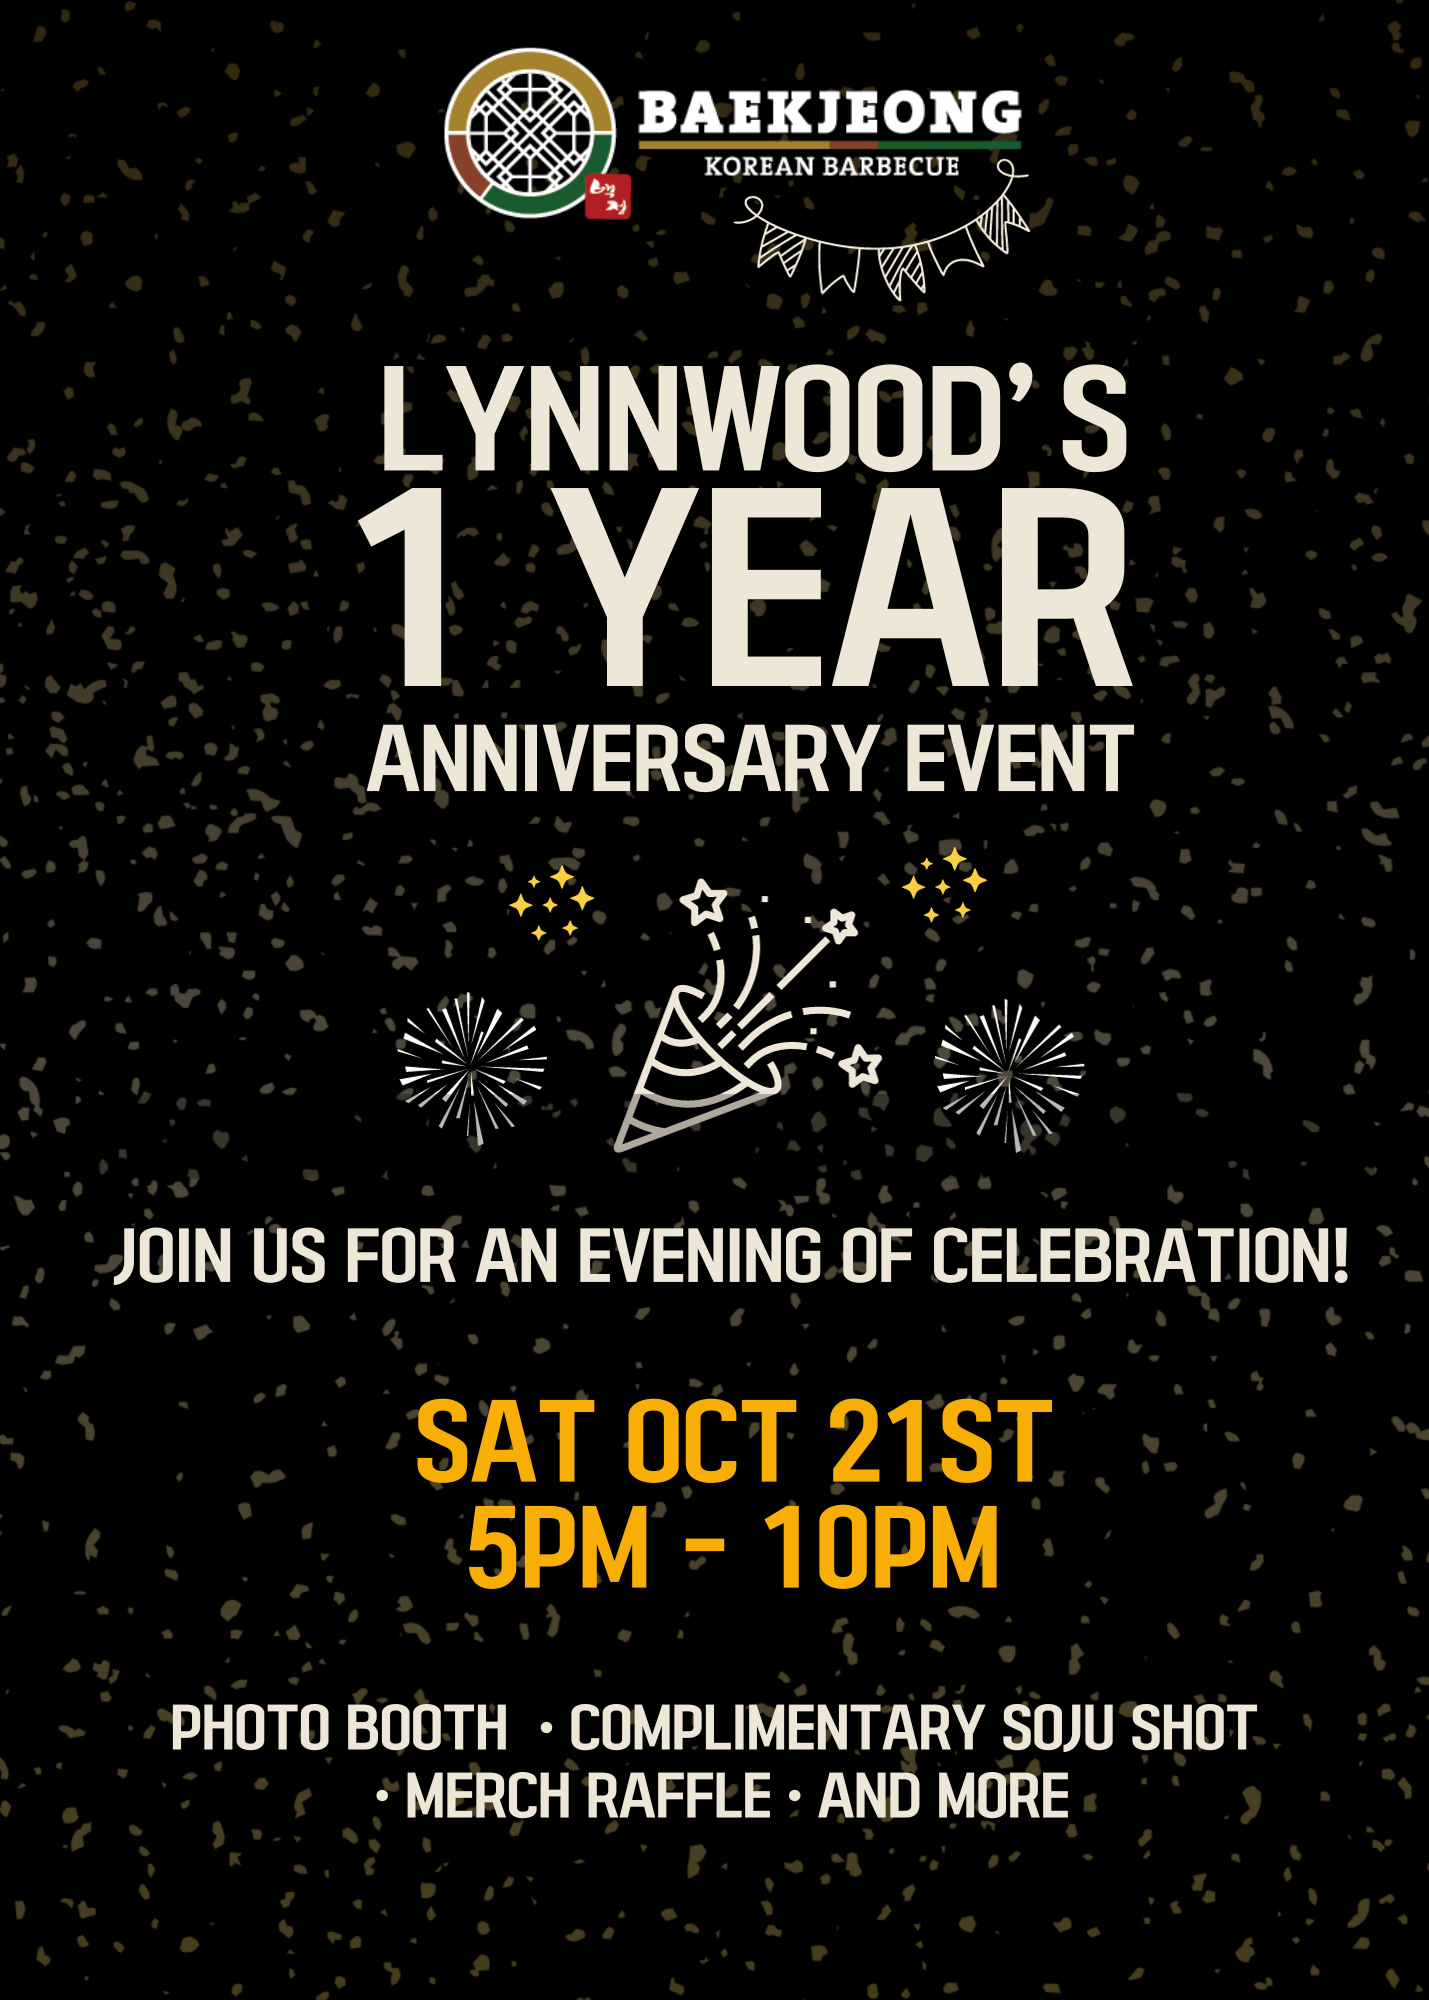 Lynnwood's 1 Year Anniversary Event - Join us for an evening of celebration! Saturday October 21st 5pm - 10pm. Photo Booth, Complimentary Soju Shot, Merch Raffle, And More